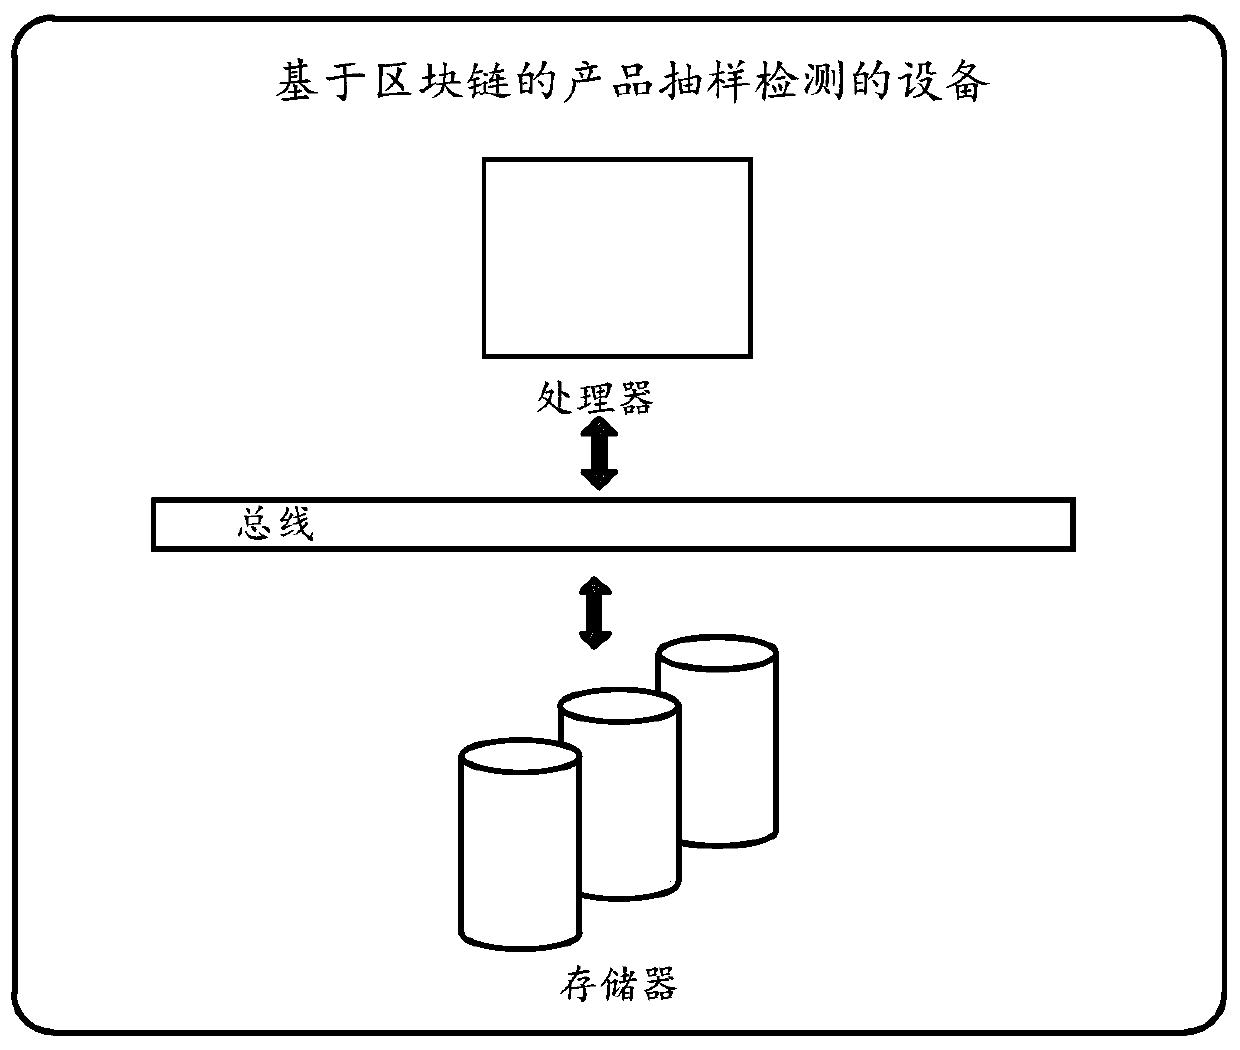 Product sampling detection method and device based on block chain, and medium